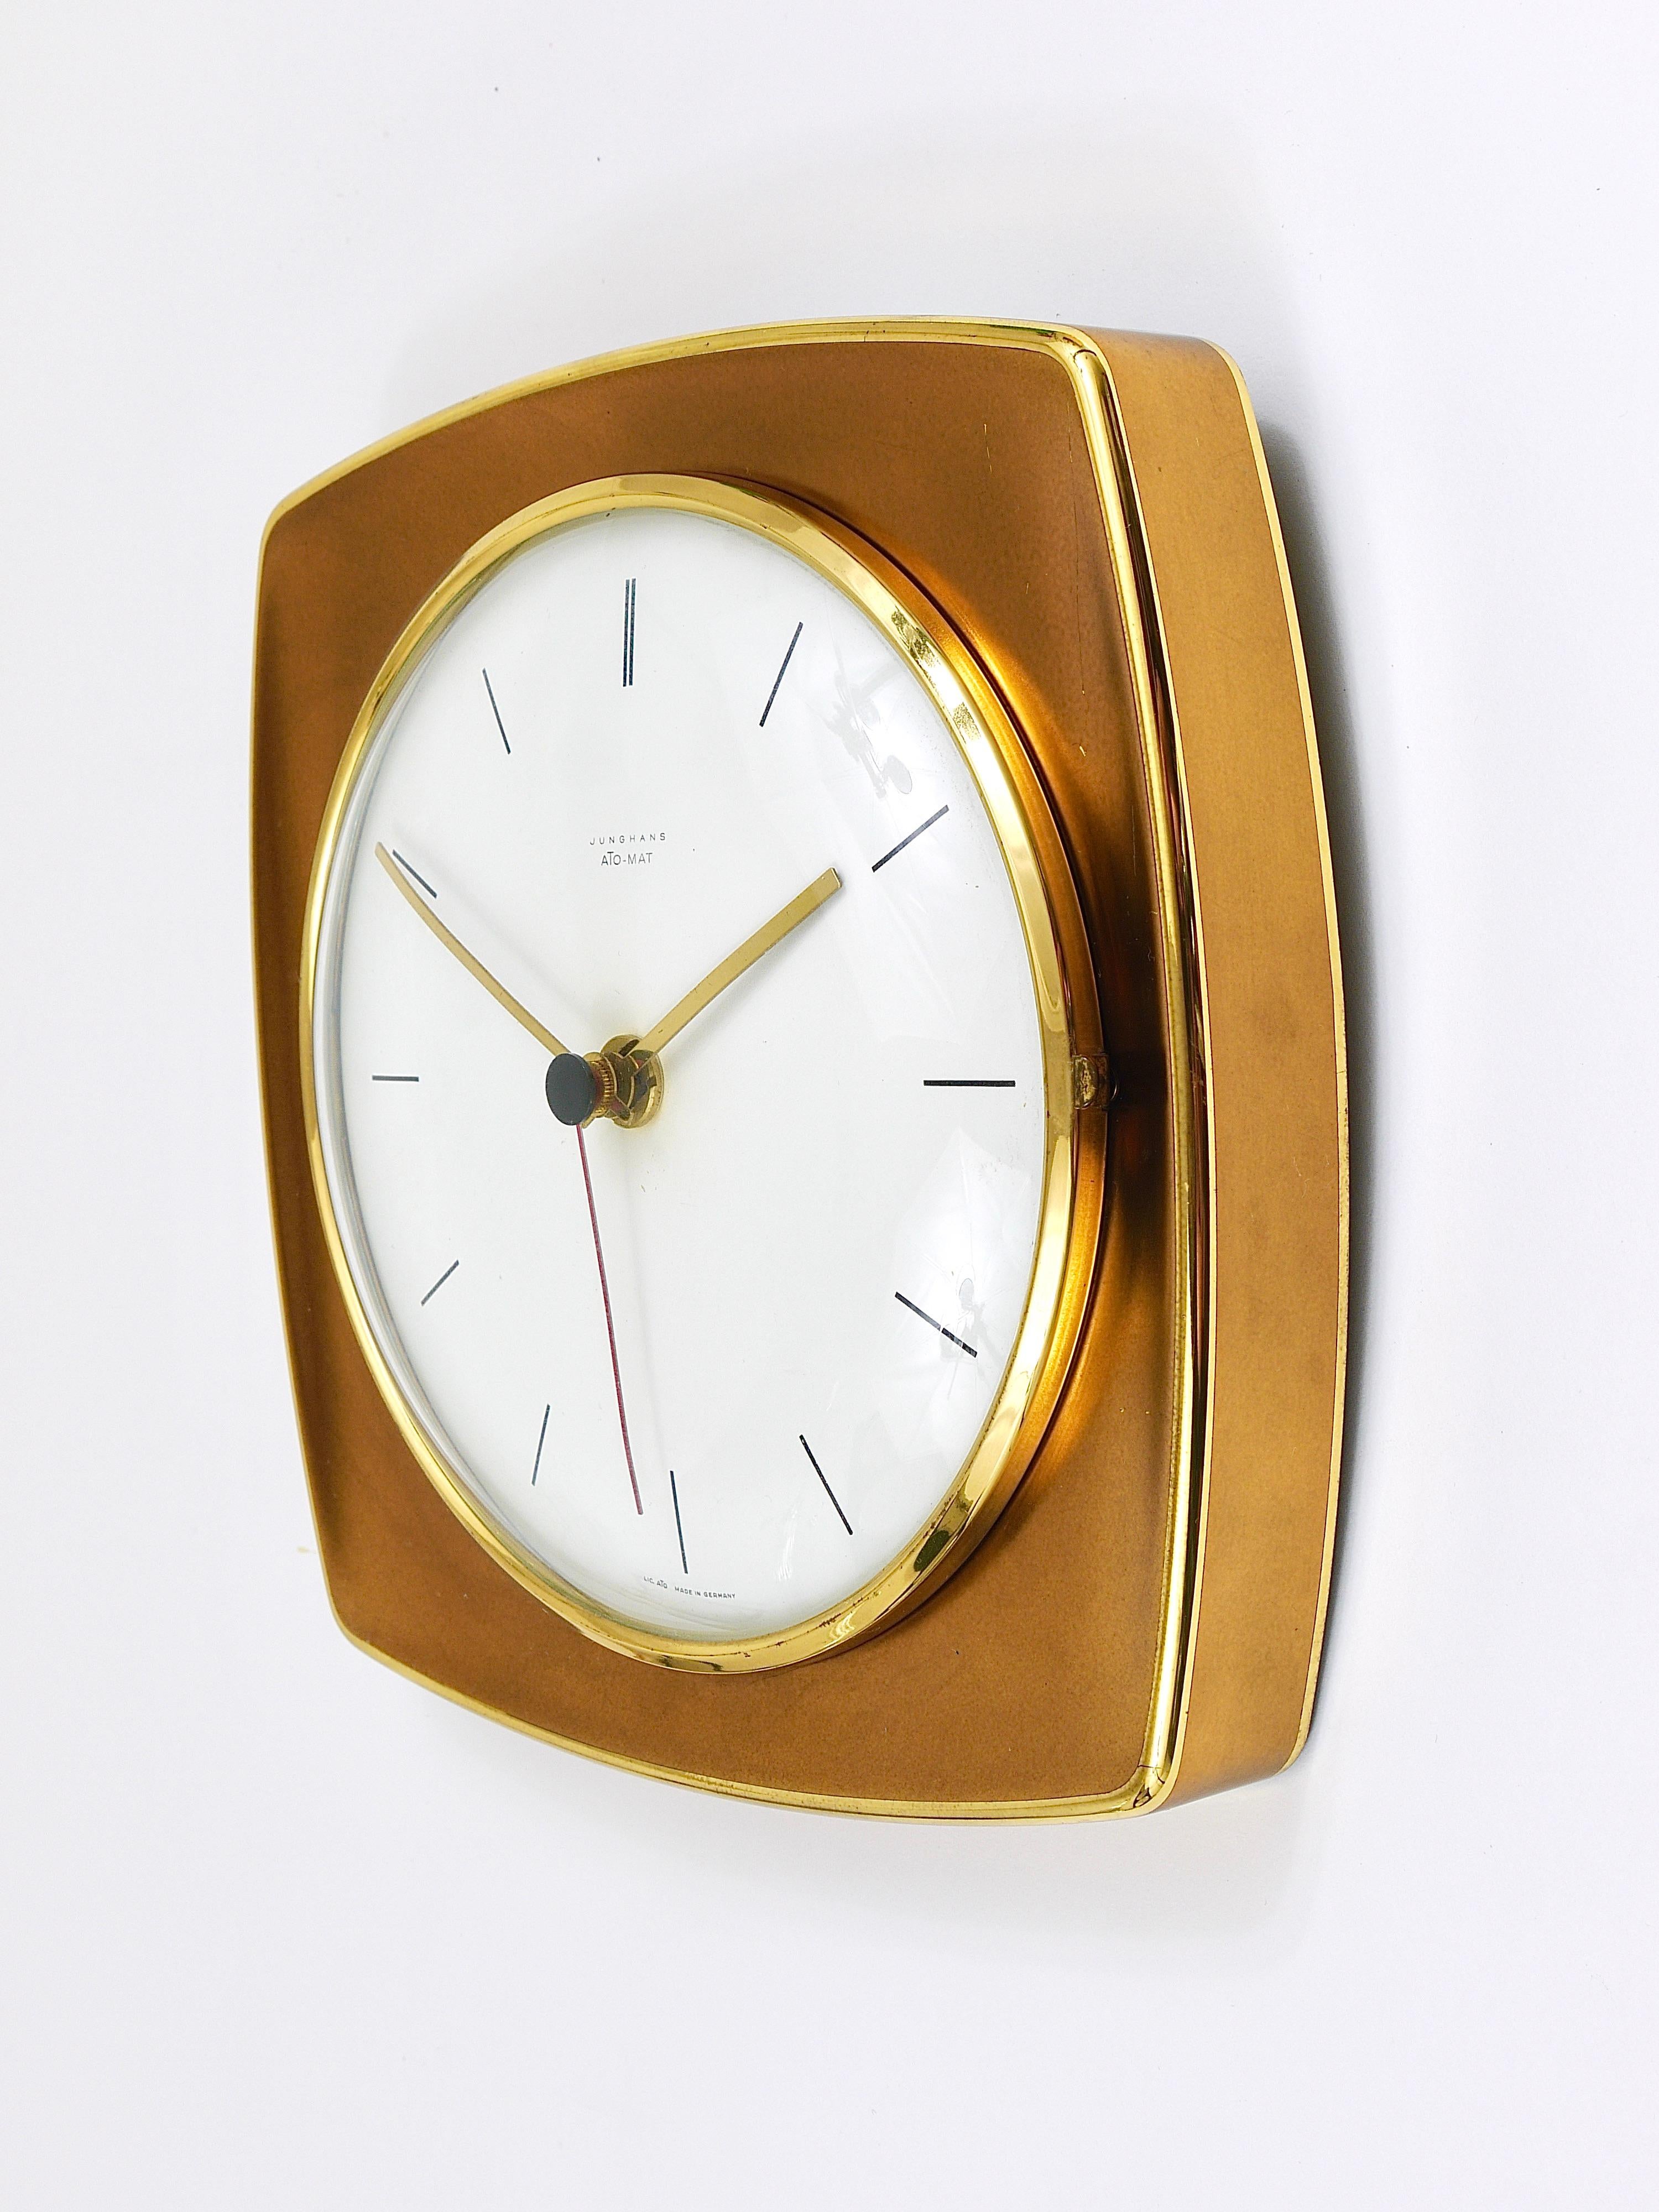 Elegant Mid-Century Junghans Ato-Mat Gold Brass Wall Clock, Germany, 1950s For Sale 4